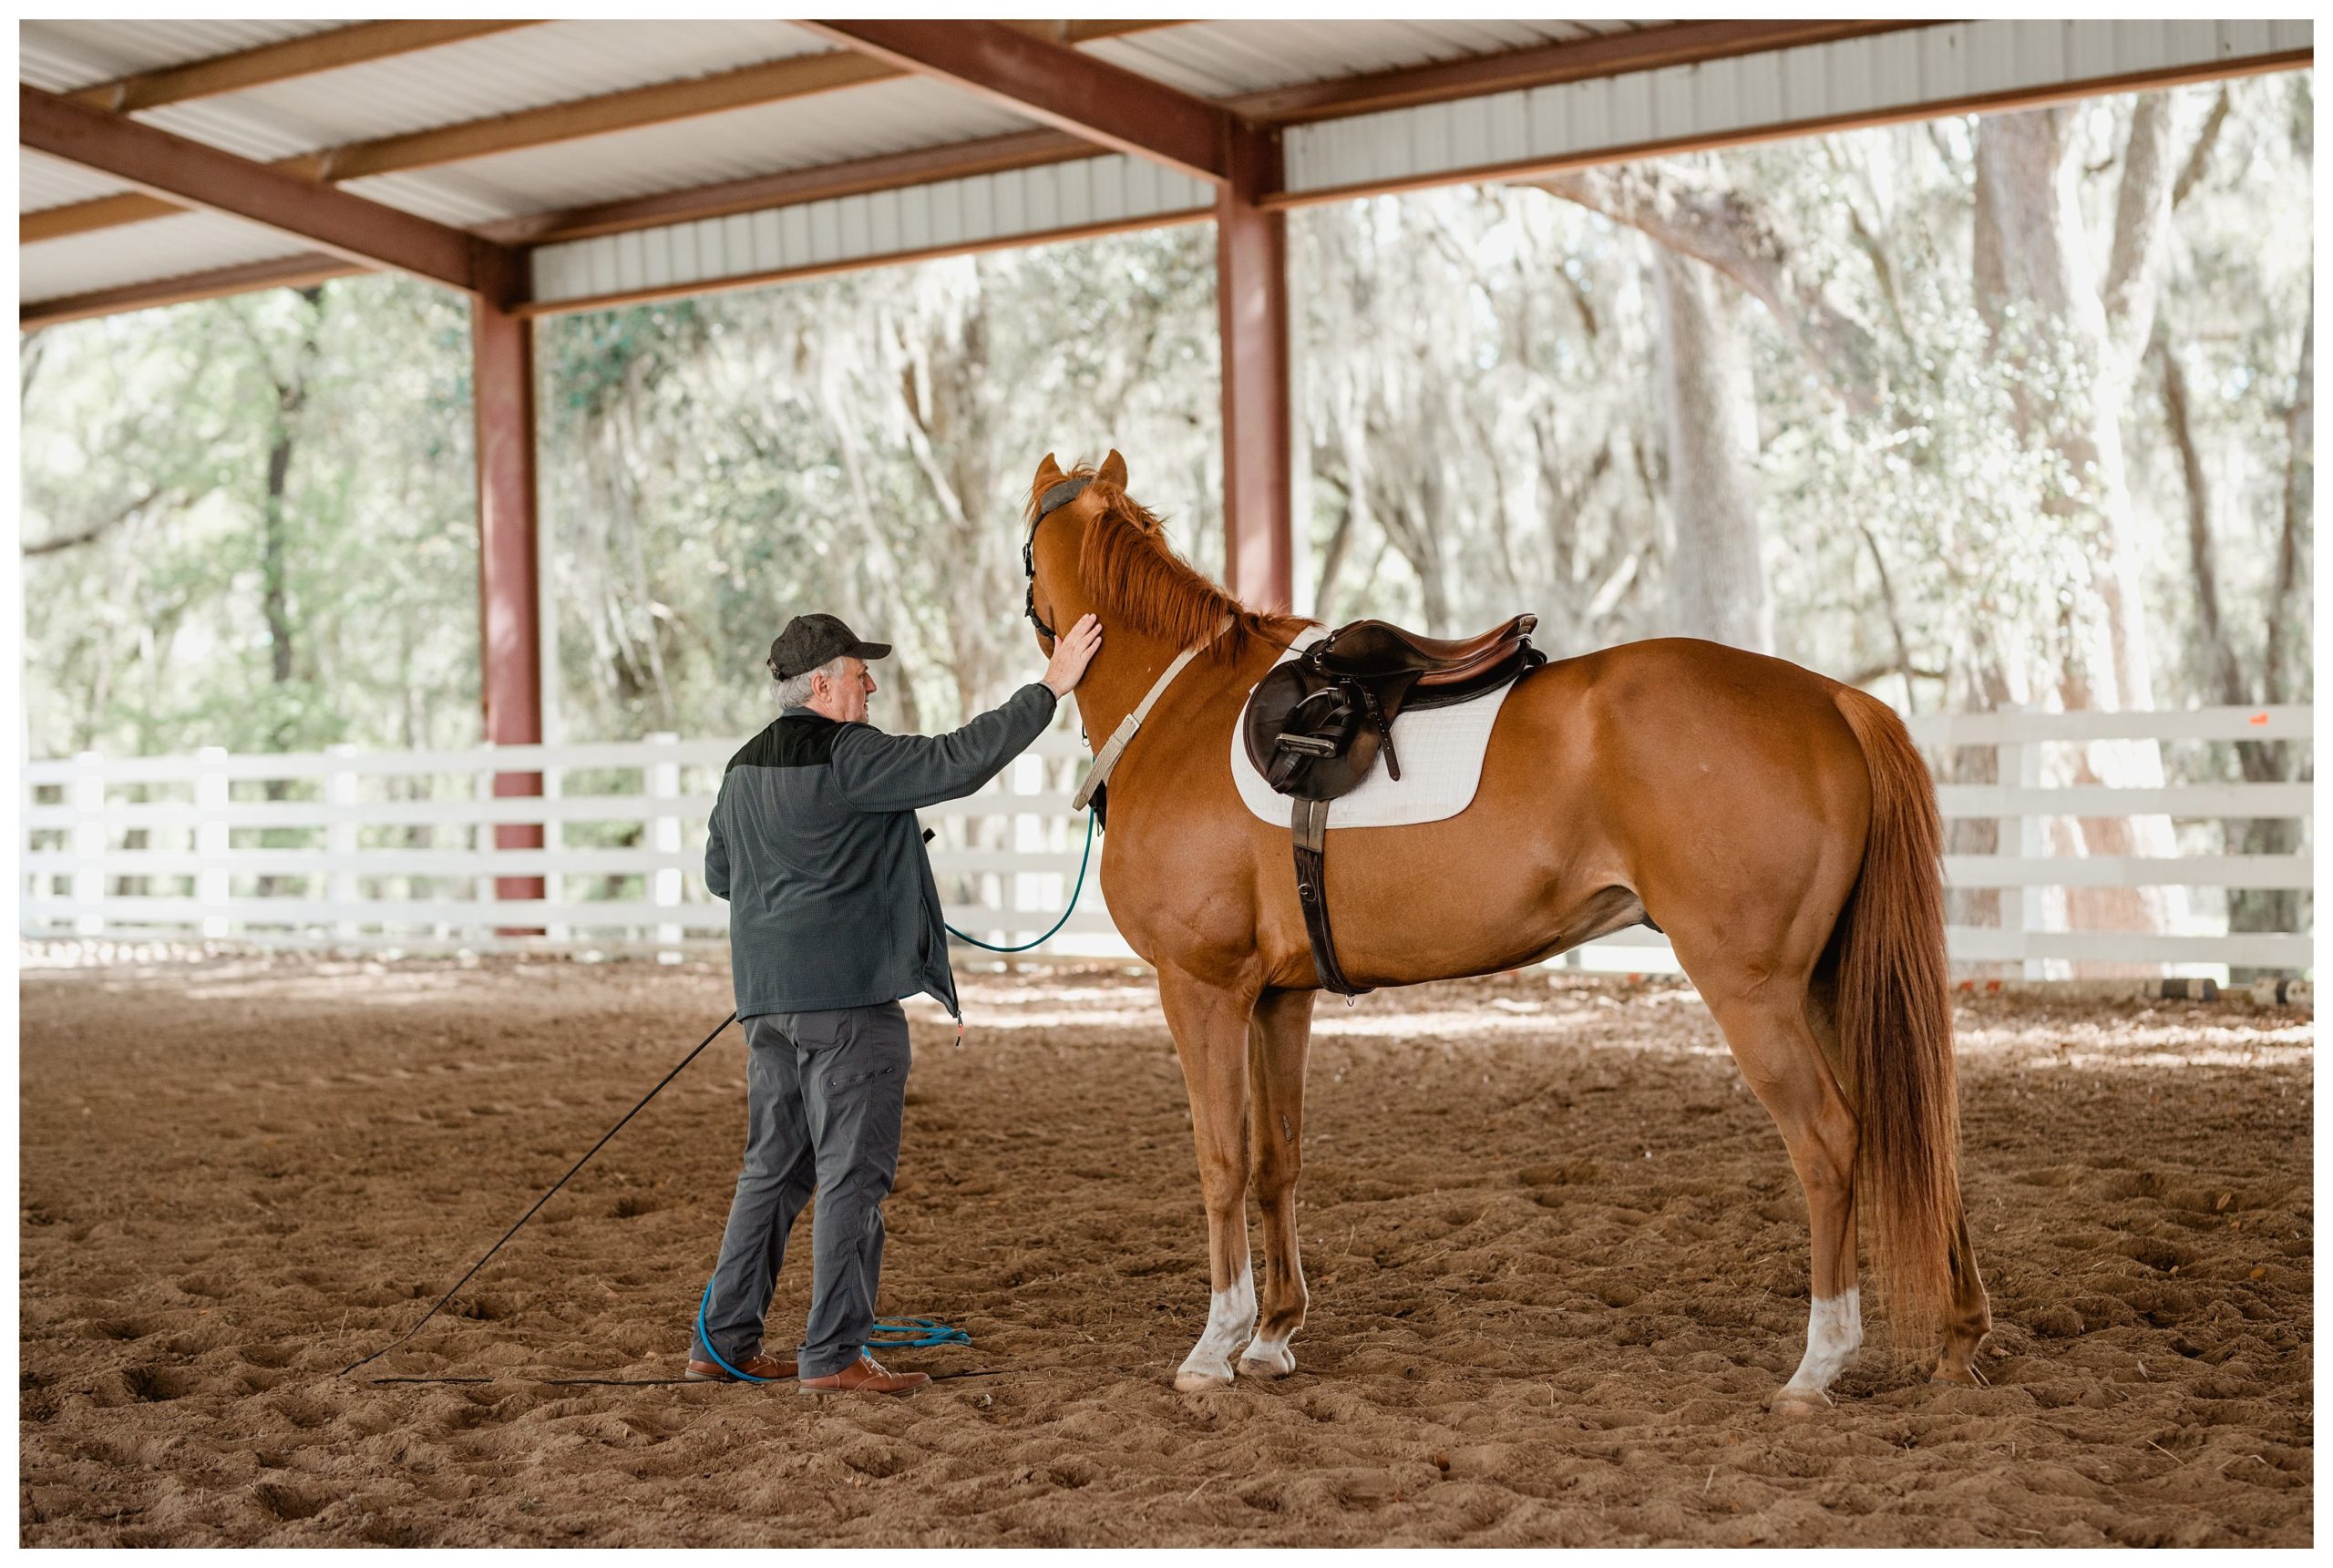 JP Giacomini is a master horseman who specializes in classical dressage.